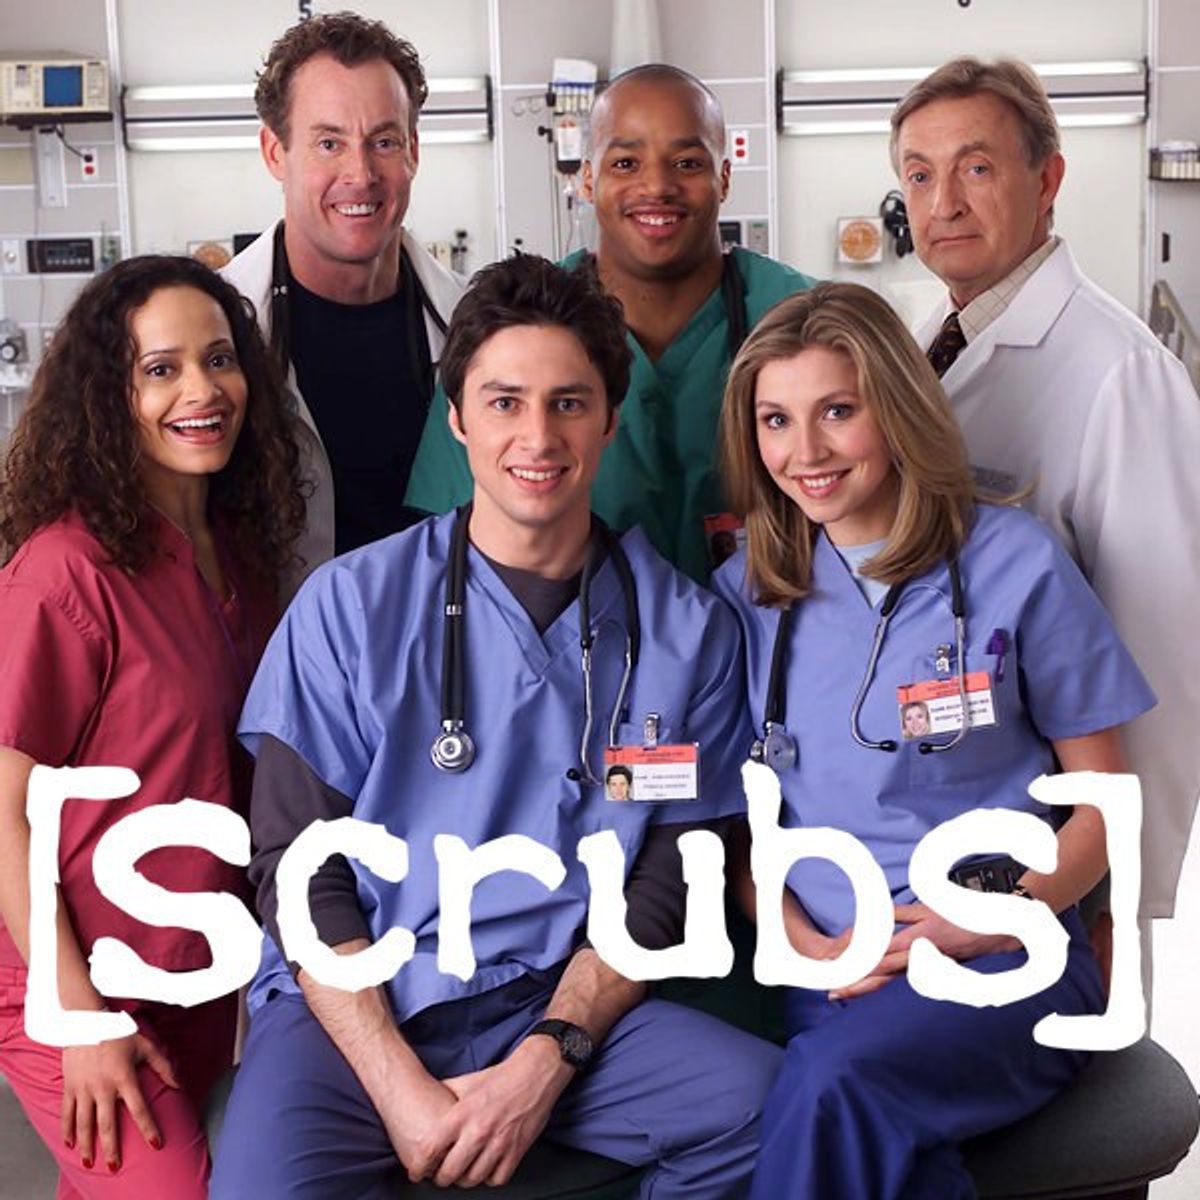 10 Times Scrubs Summed Up College Students On Break